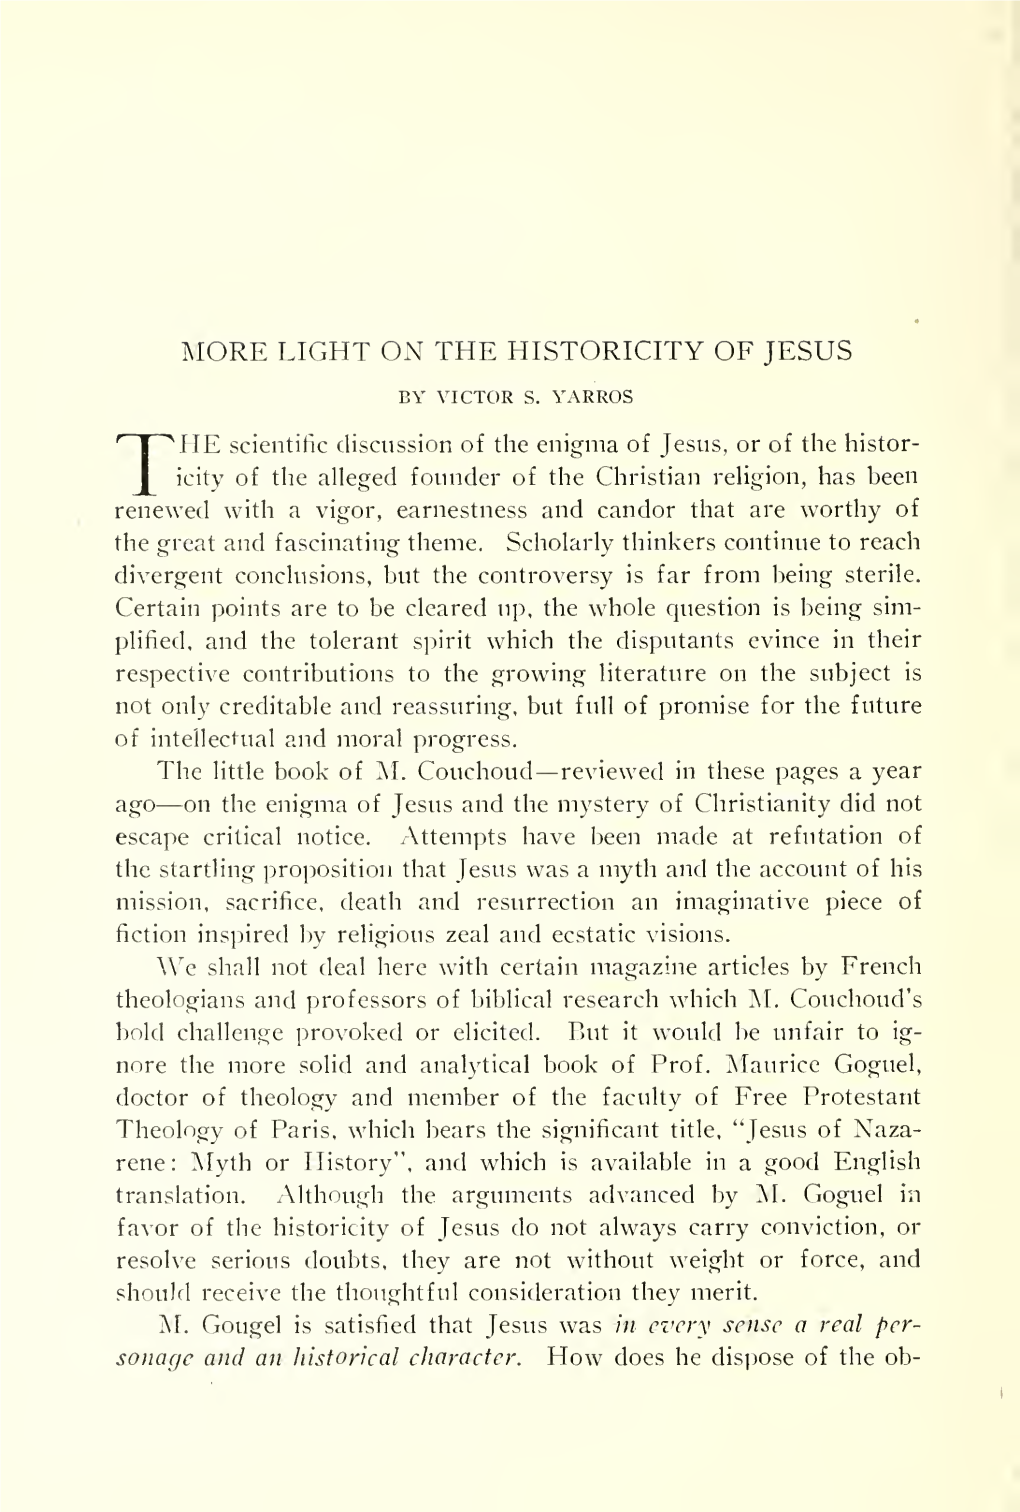 More Light on the Historicity of Jesus